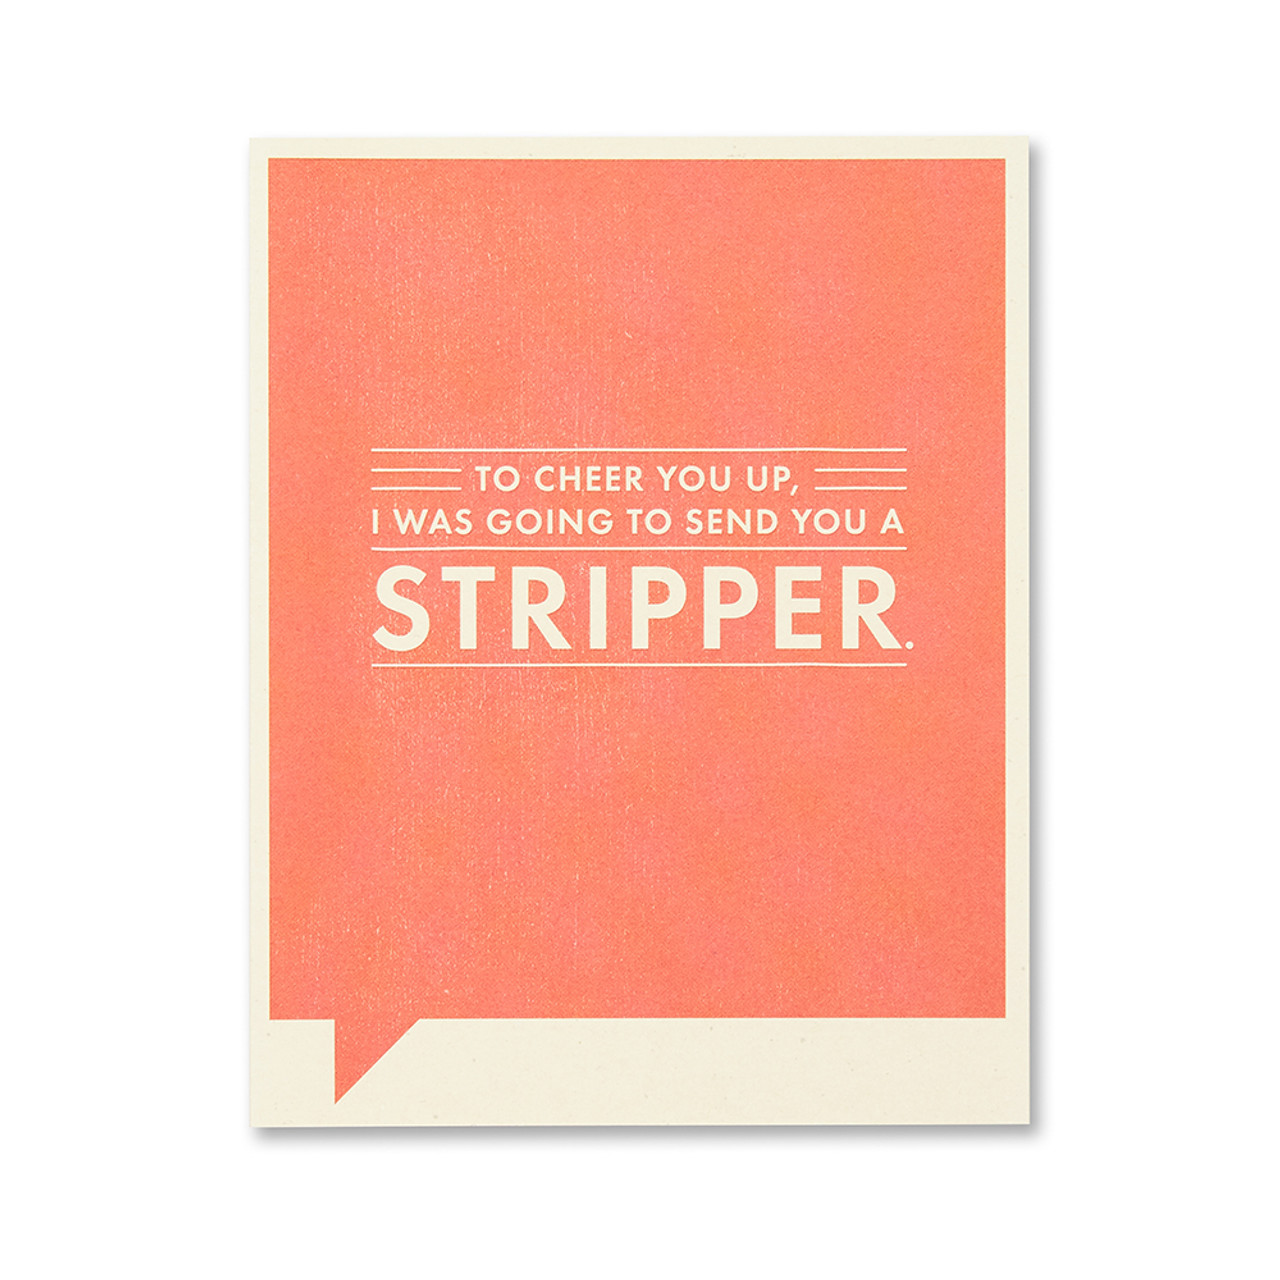 Frank and Funny Greeting Card - Get Well - To Cheer You Up I Was Going To Send You A Stripper - Mellow Monkey